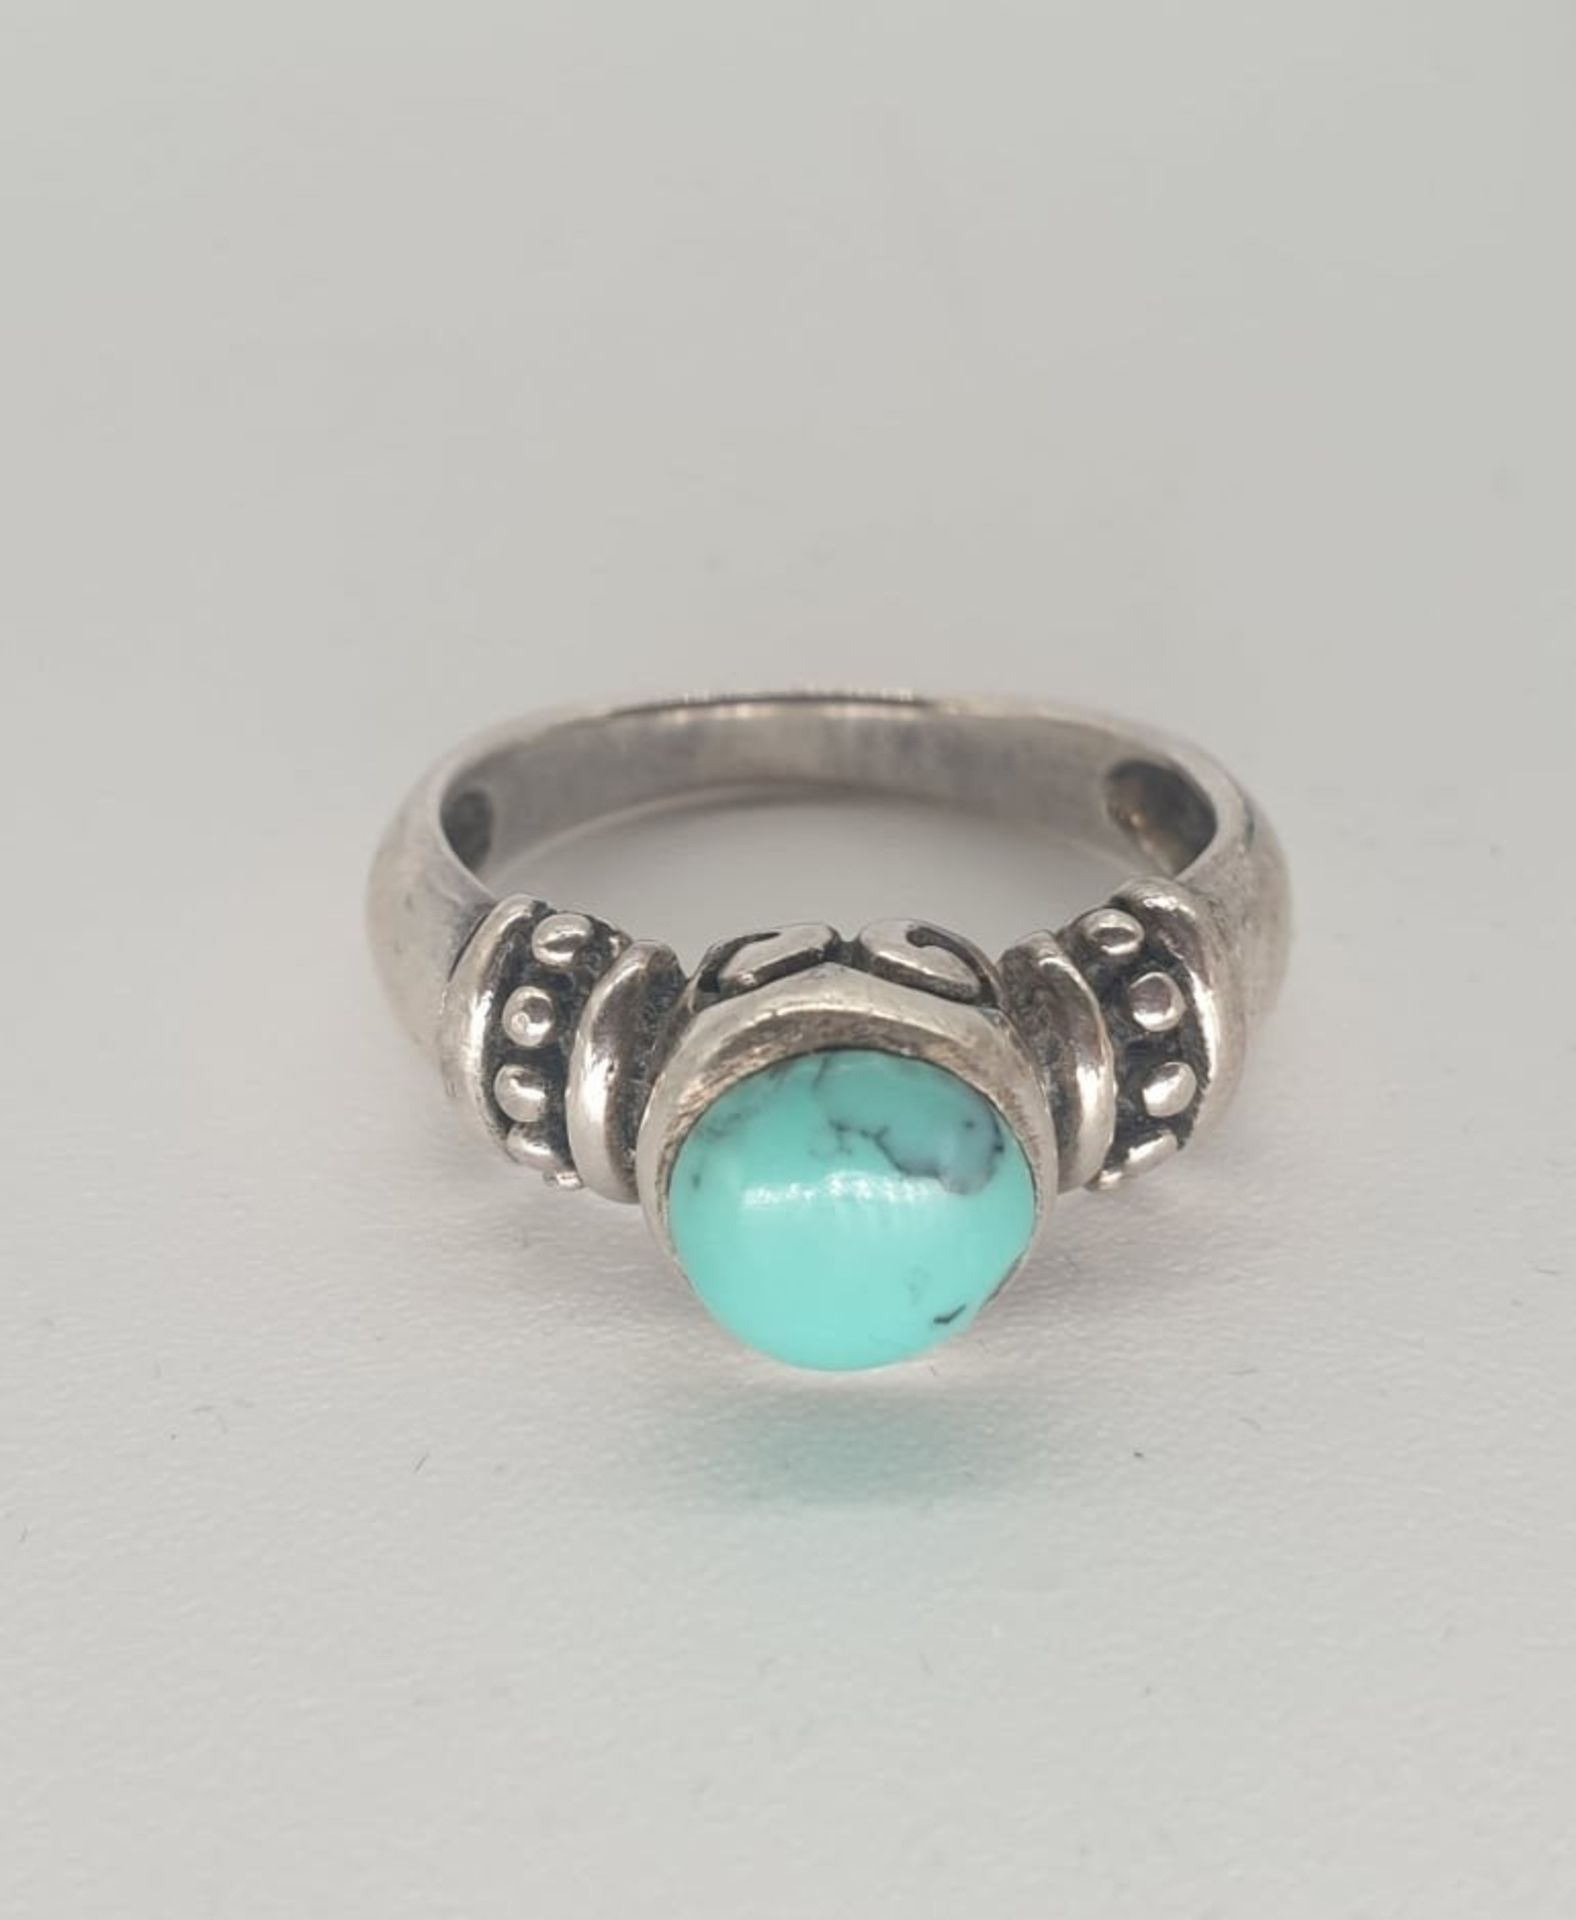 Native American turquoise - Image 3 of 6